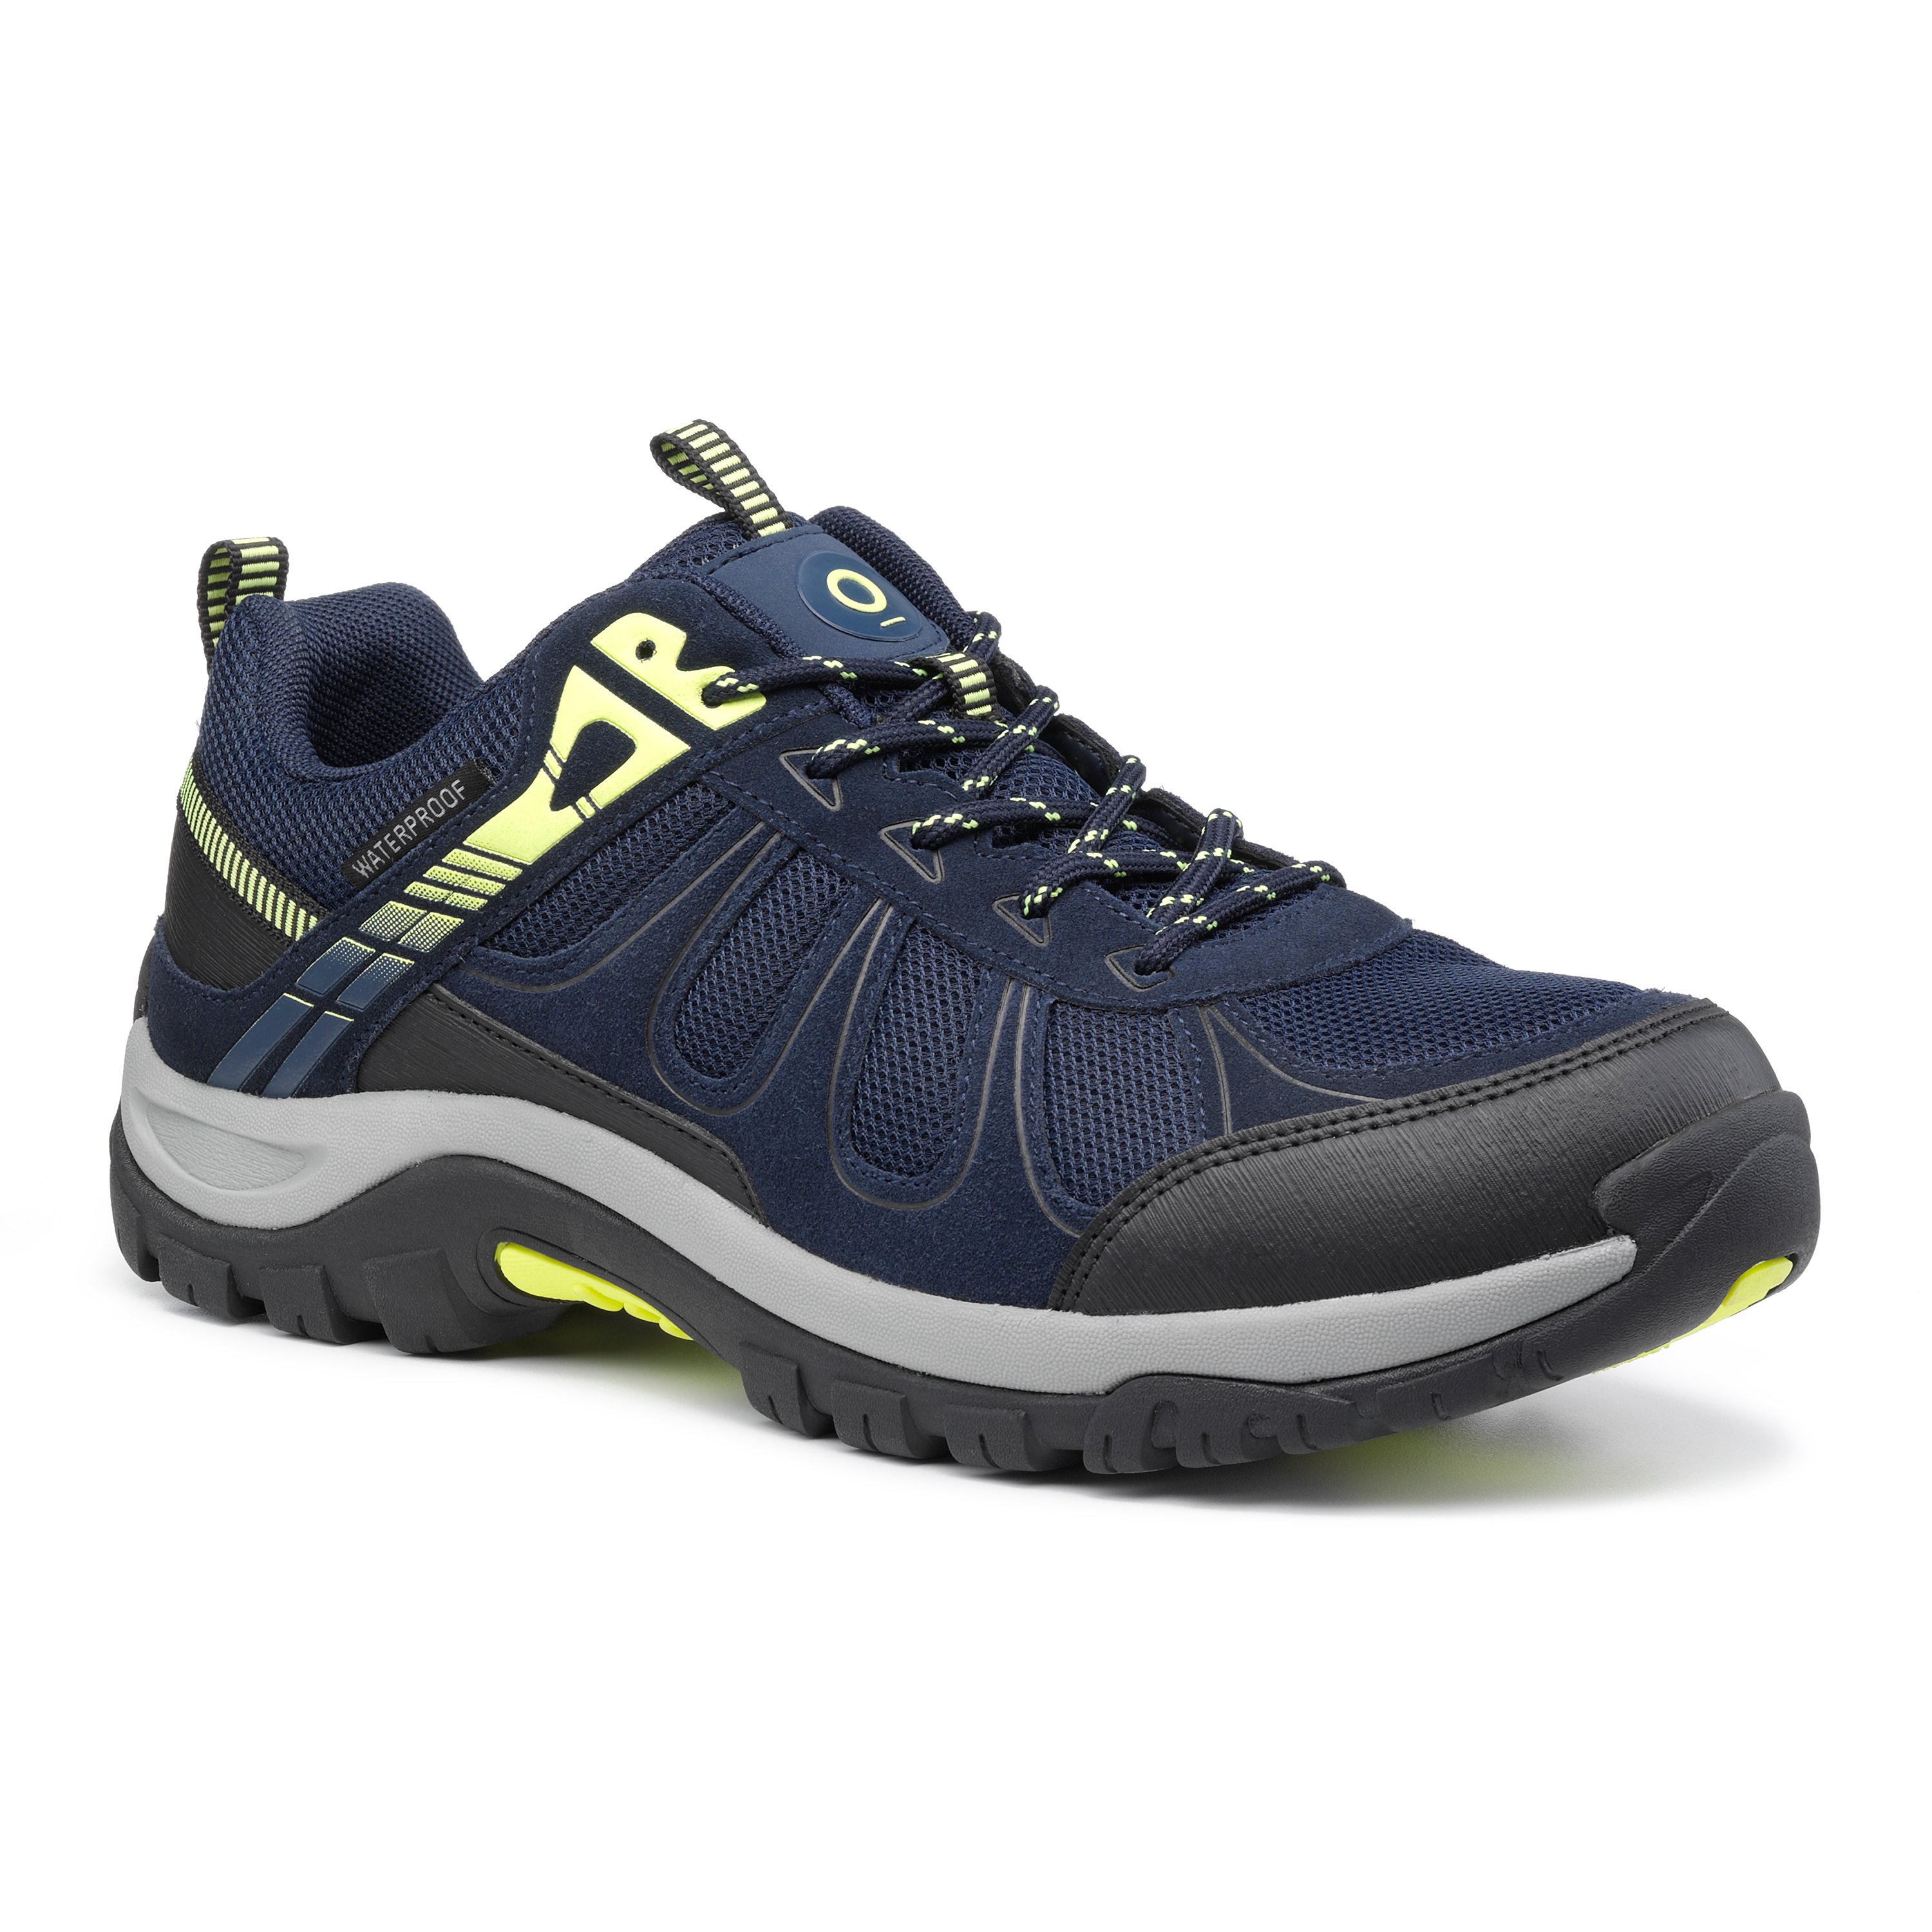 Navy / Grey | Expedition WP Shoes |Hotter UK